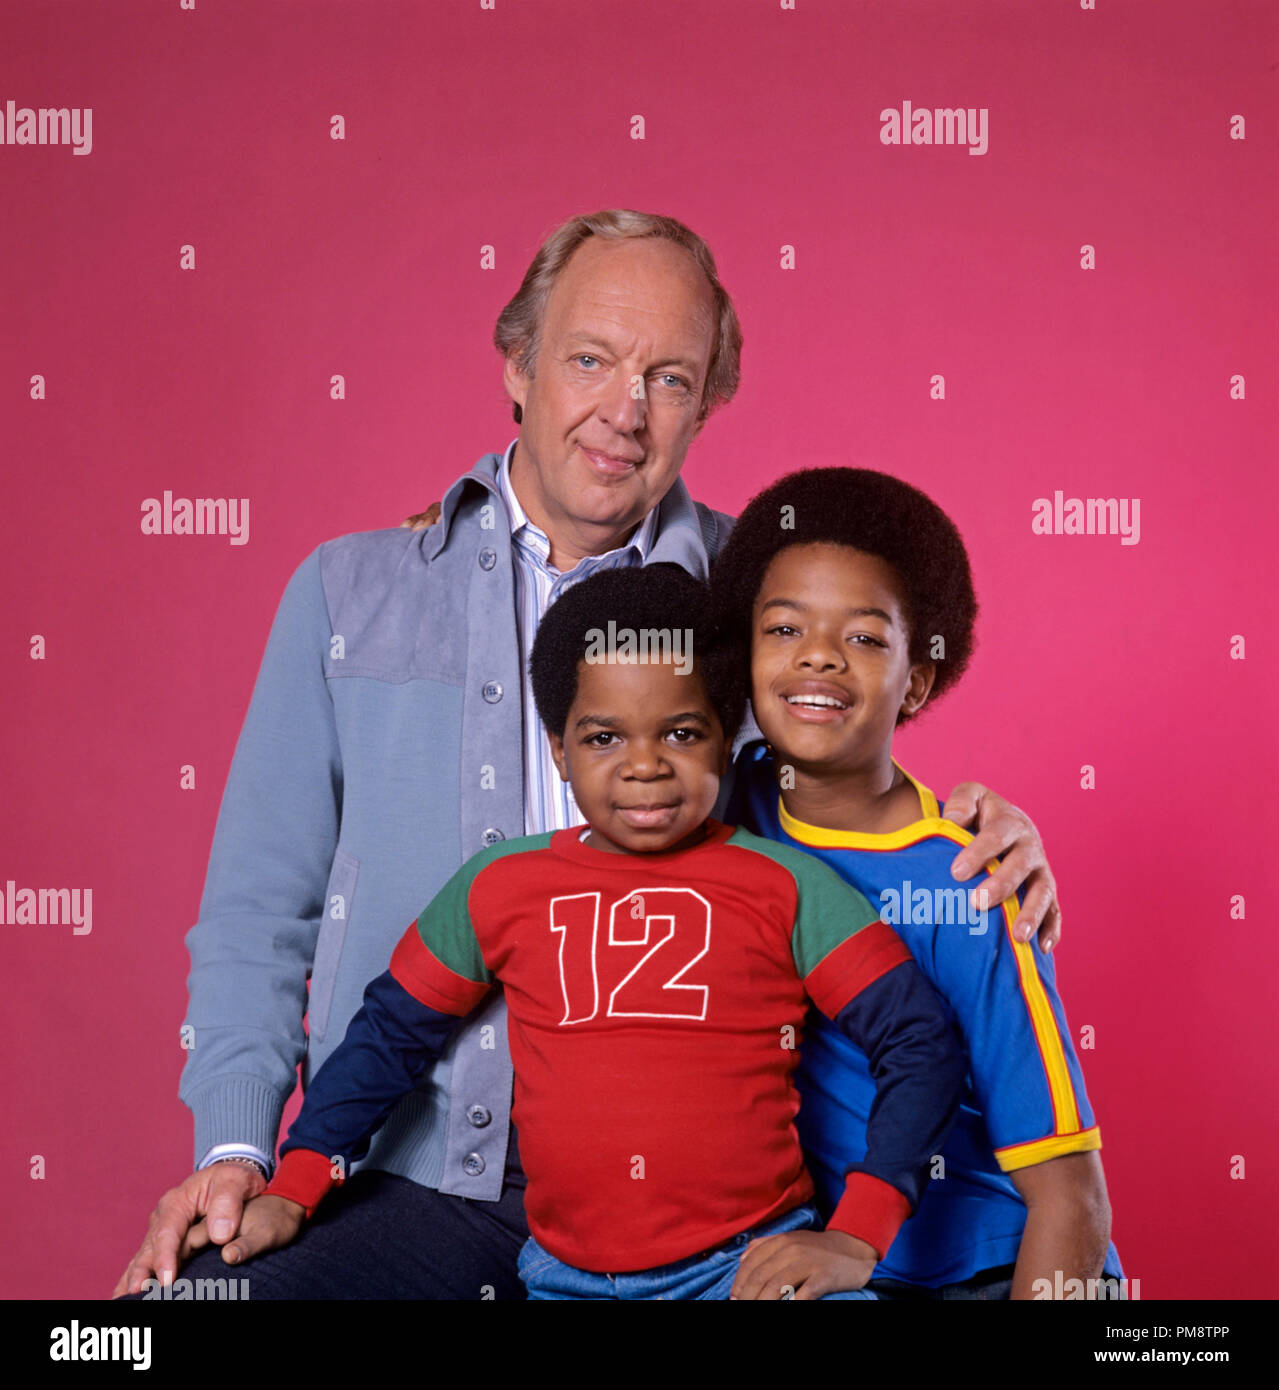 Studio Publicity Still from 'Diff'rent Strokes' Conrad Bain, Gary Coleman, Todd Bridges circa 1980    All Rights Reserved   File Reference # 31715266THA  For Editorial Use Only Stock Photo